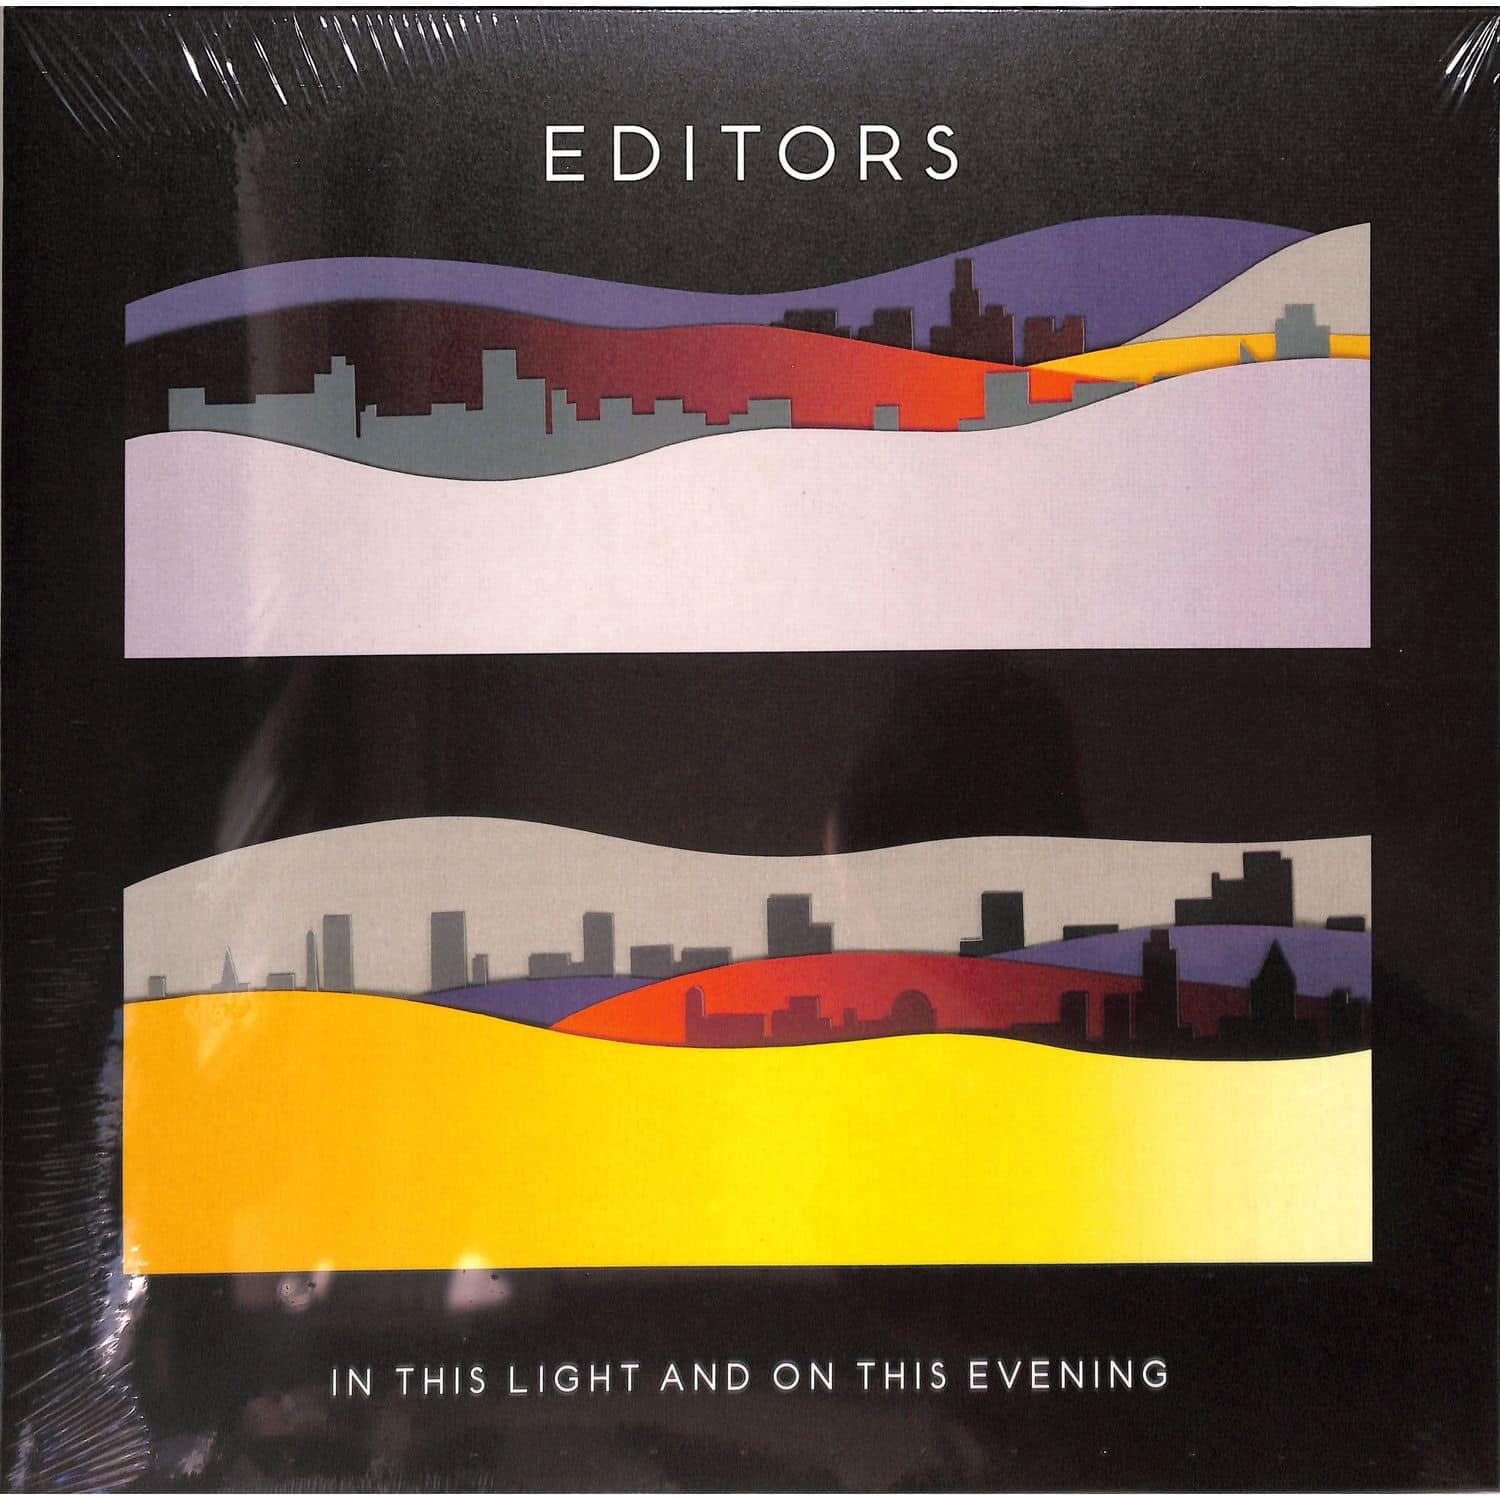 Editors - IN THIS LIGHT AND ON THIS EVENING 